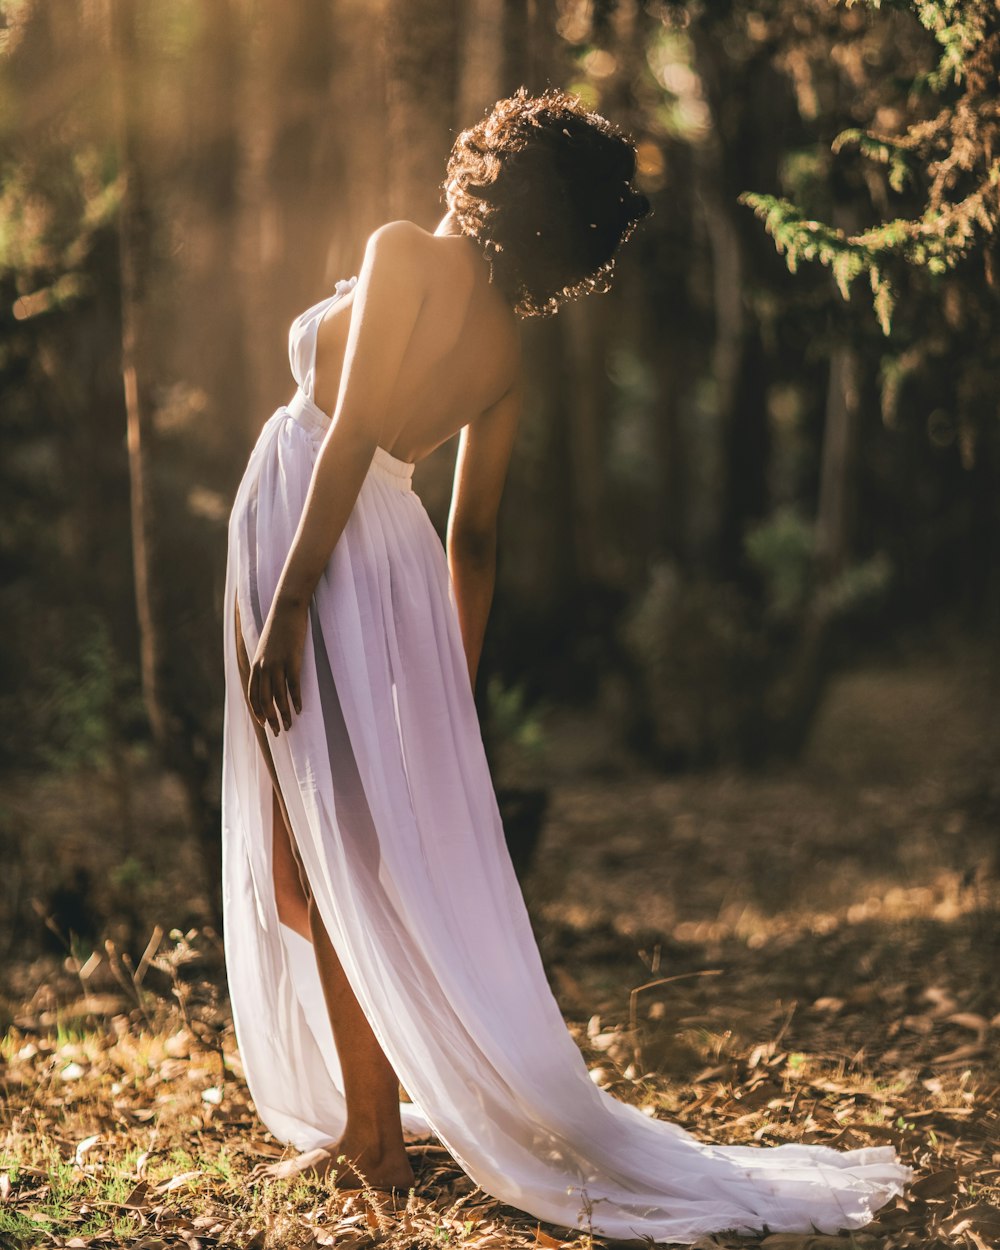 woman in white dress standing on brown dried leaves during daytime